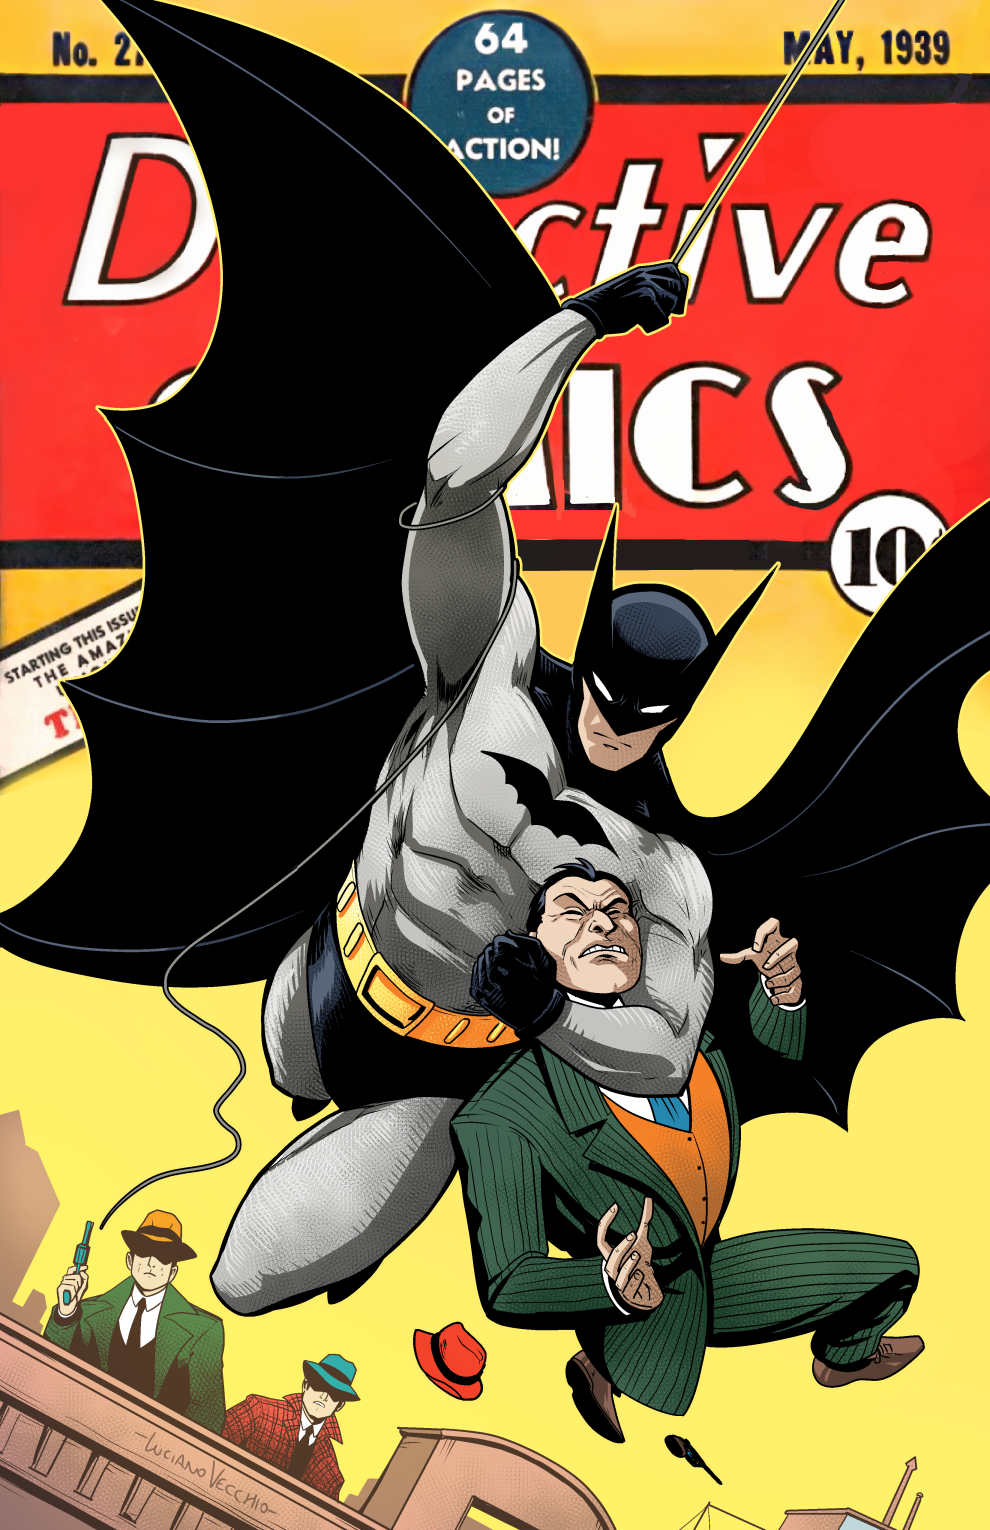 Detective Comics 27 homage by LucianoVecchio on DeviantArt